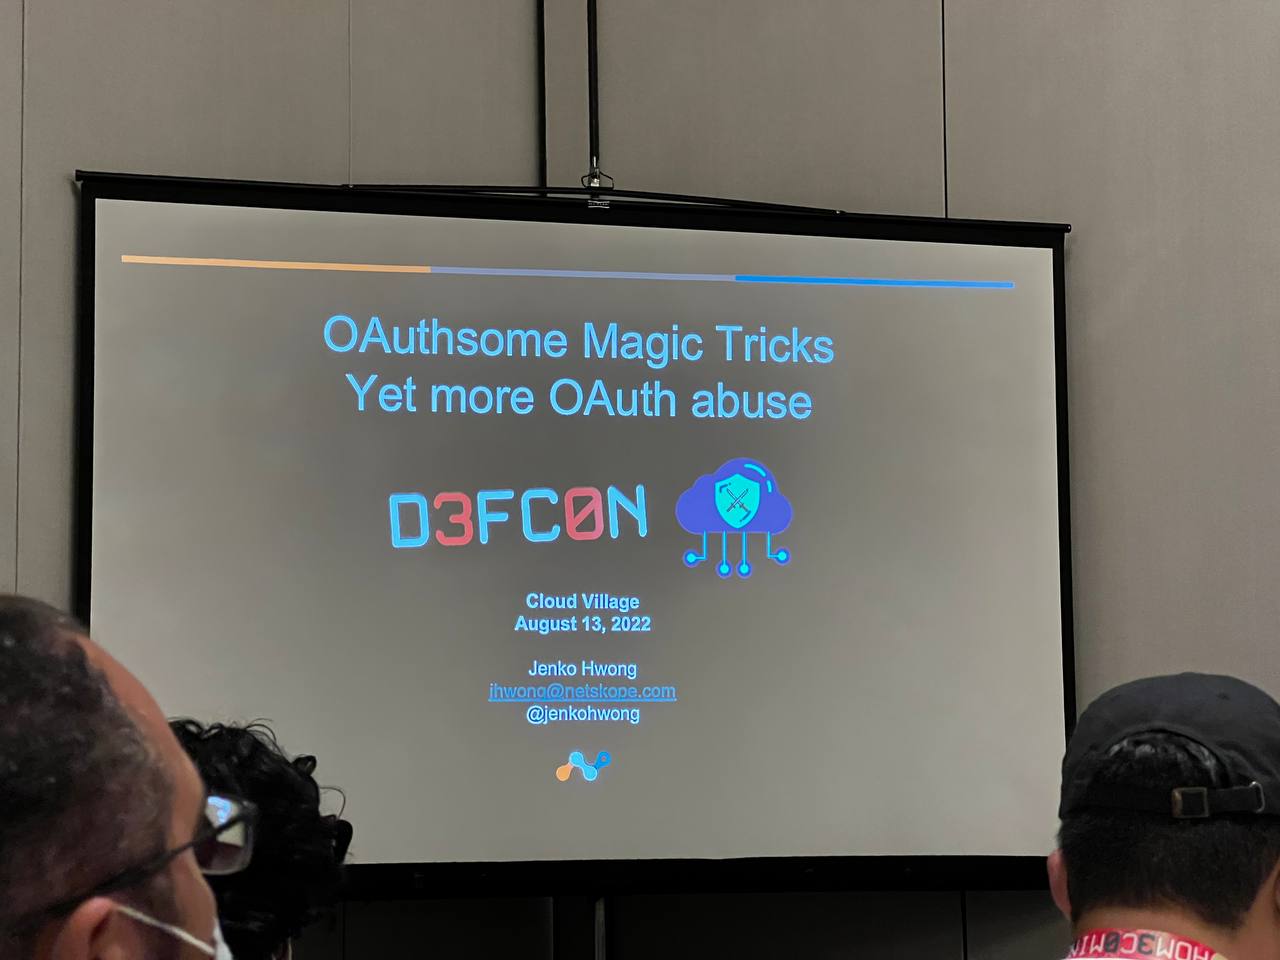 OAuthsome magic tricks yet more oauth abuse by Jenko Hwong